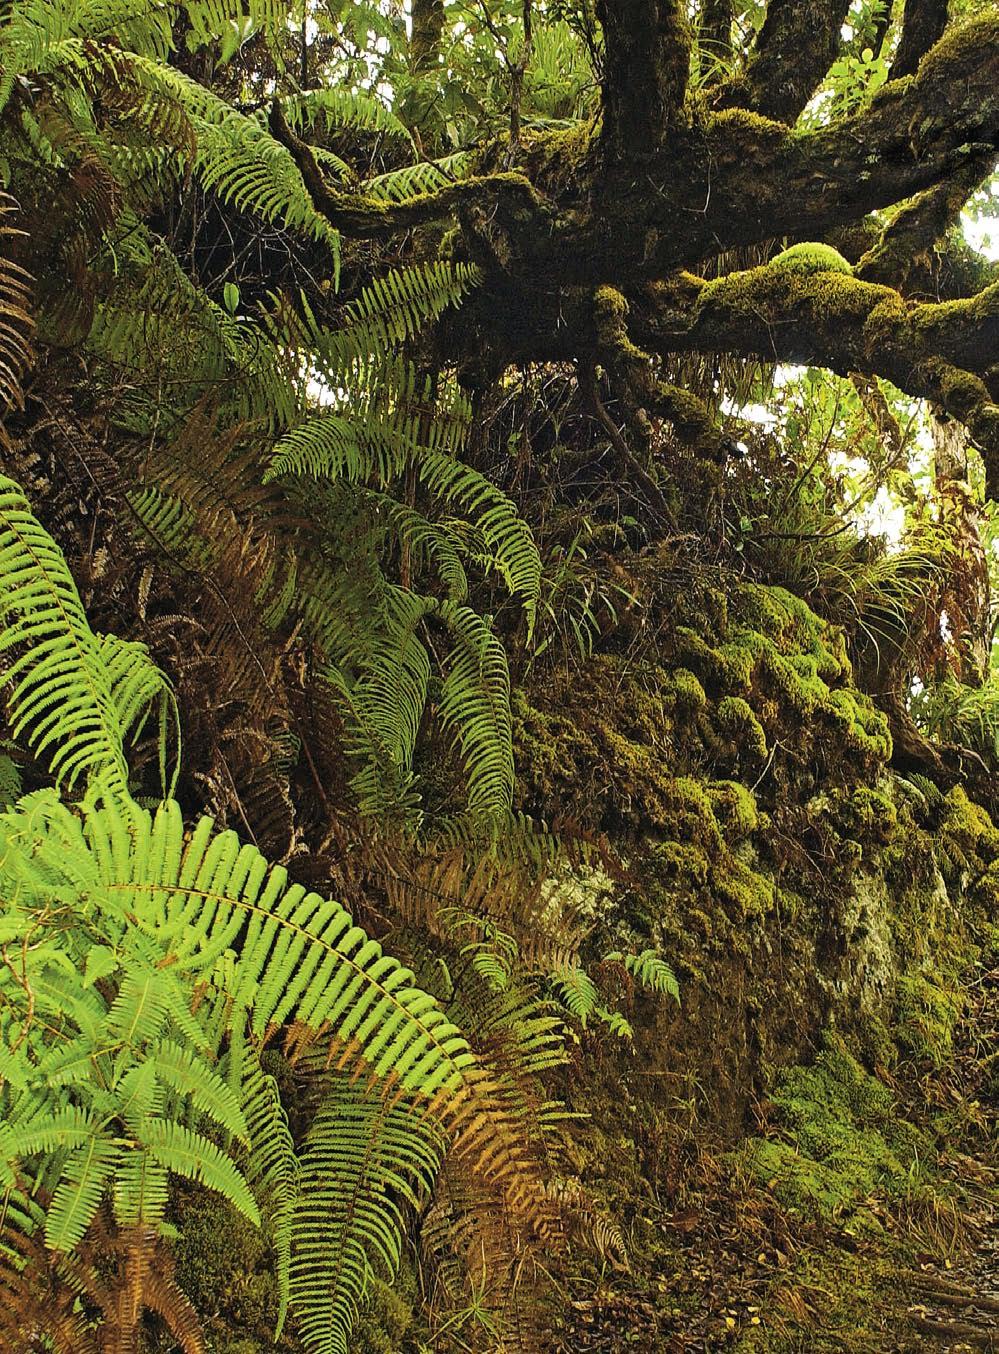 Tropical rain forests provide environments